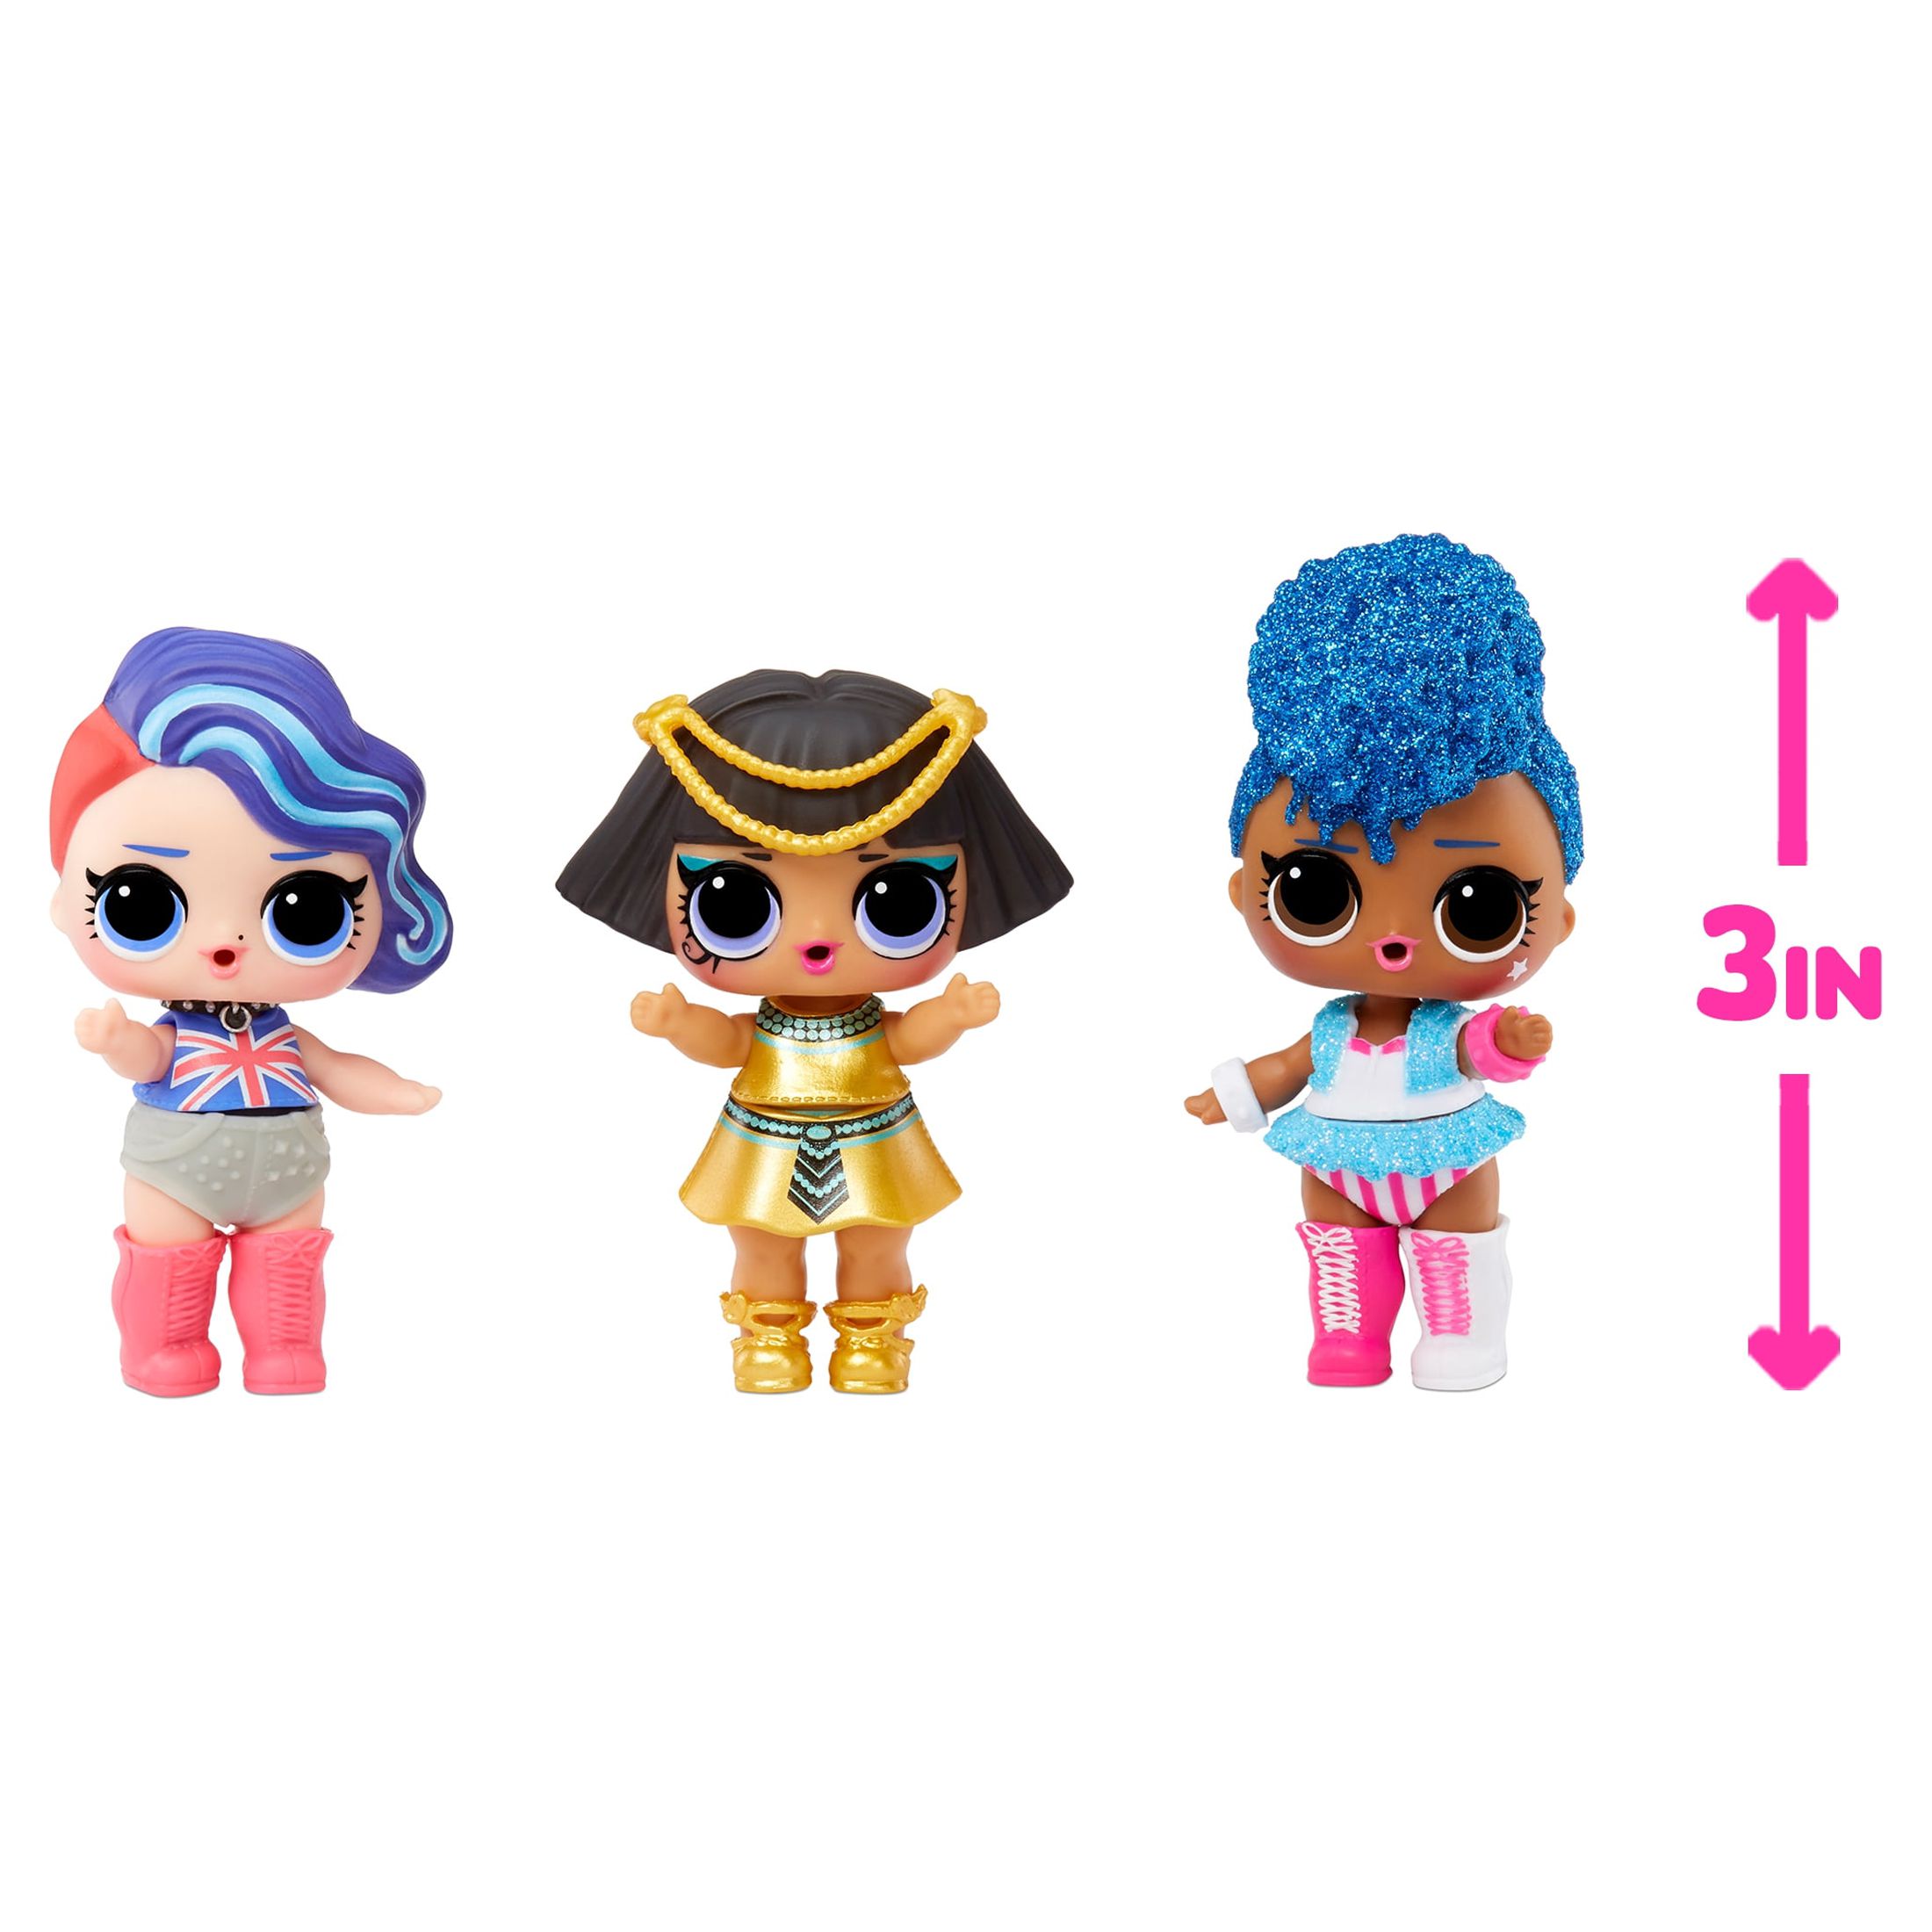 LOL Surprise World Travel™ Dolls with 8 Surprises Including Doll, Fashions, and Travel Themed Accessories - Great Gift for Girls Age 4+ - image 5 of 7